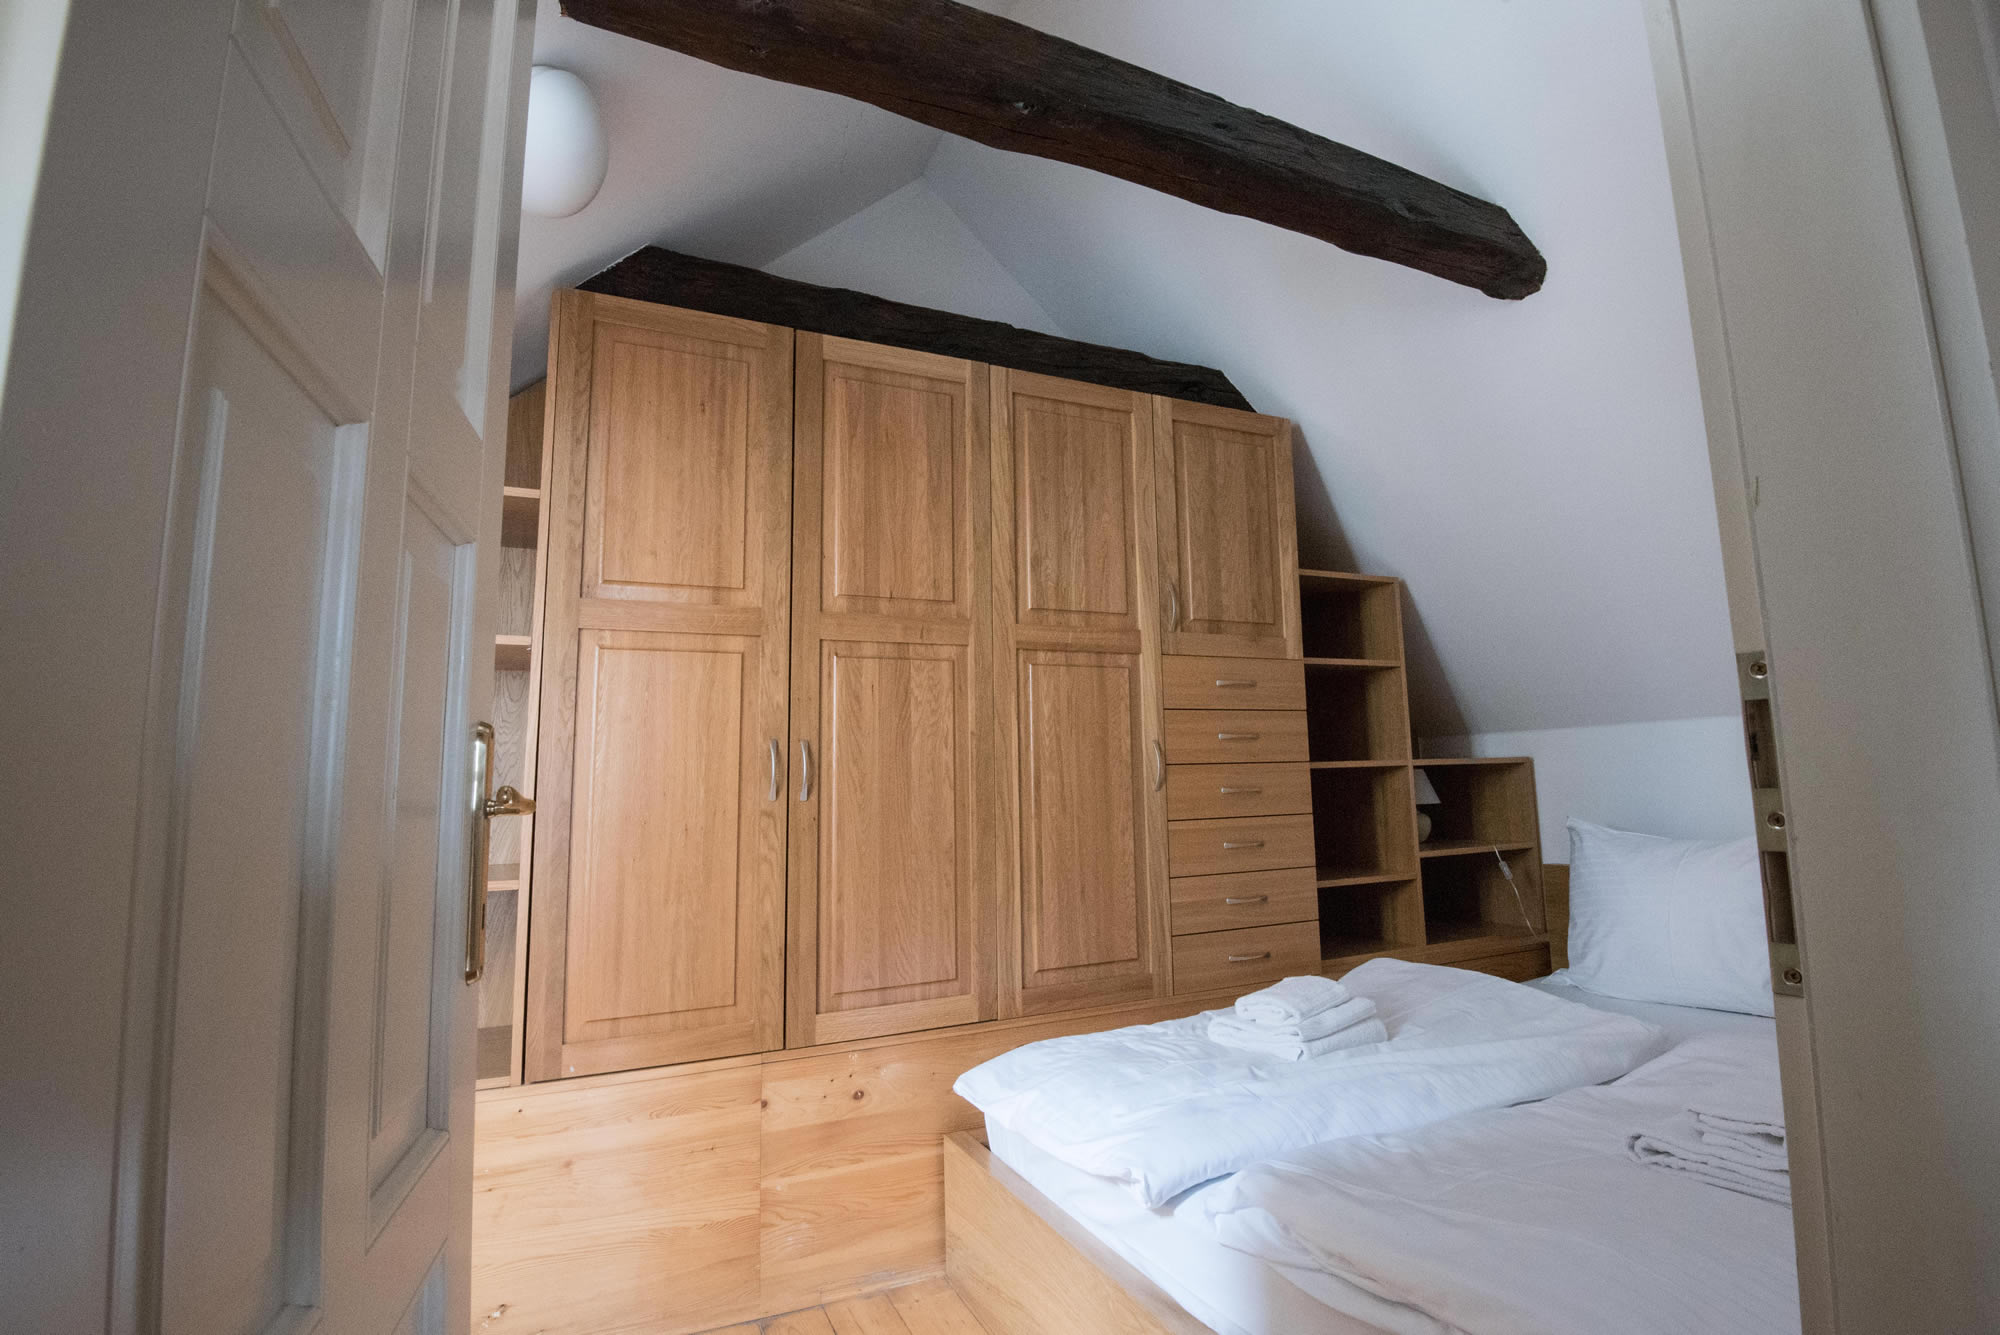 Attic bedroom with white bed sheets, wooden wardrobe and wood beams.